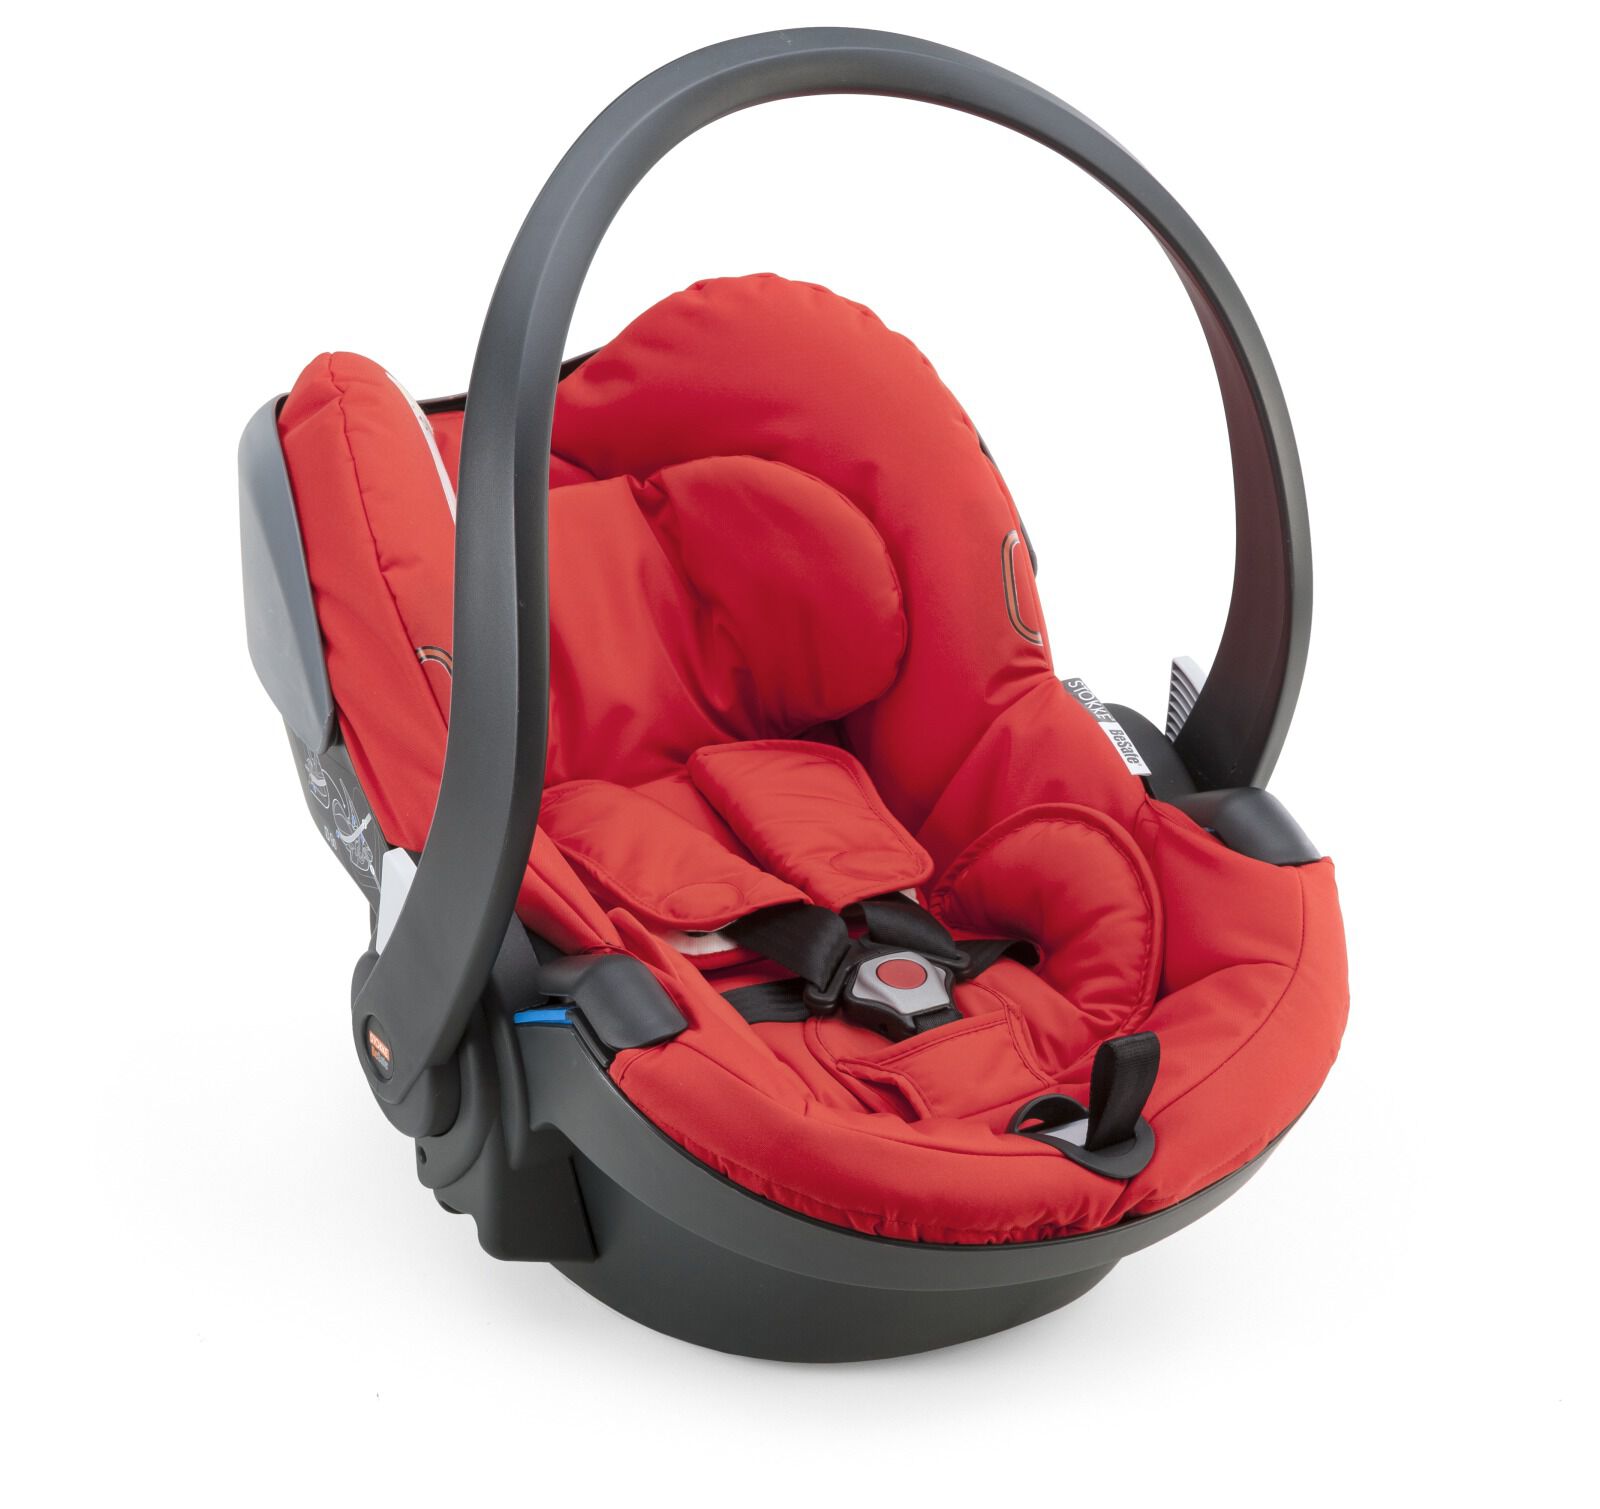 stokke baby seat instructions